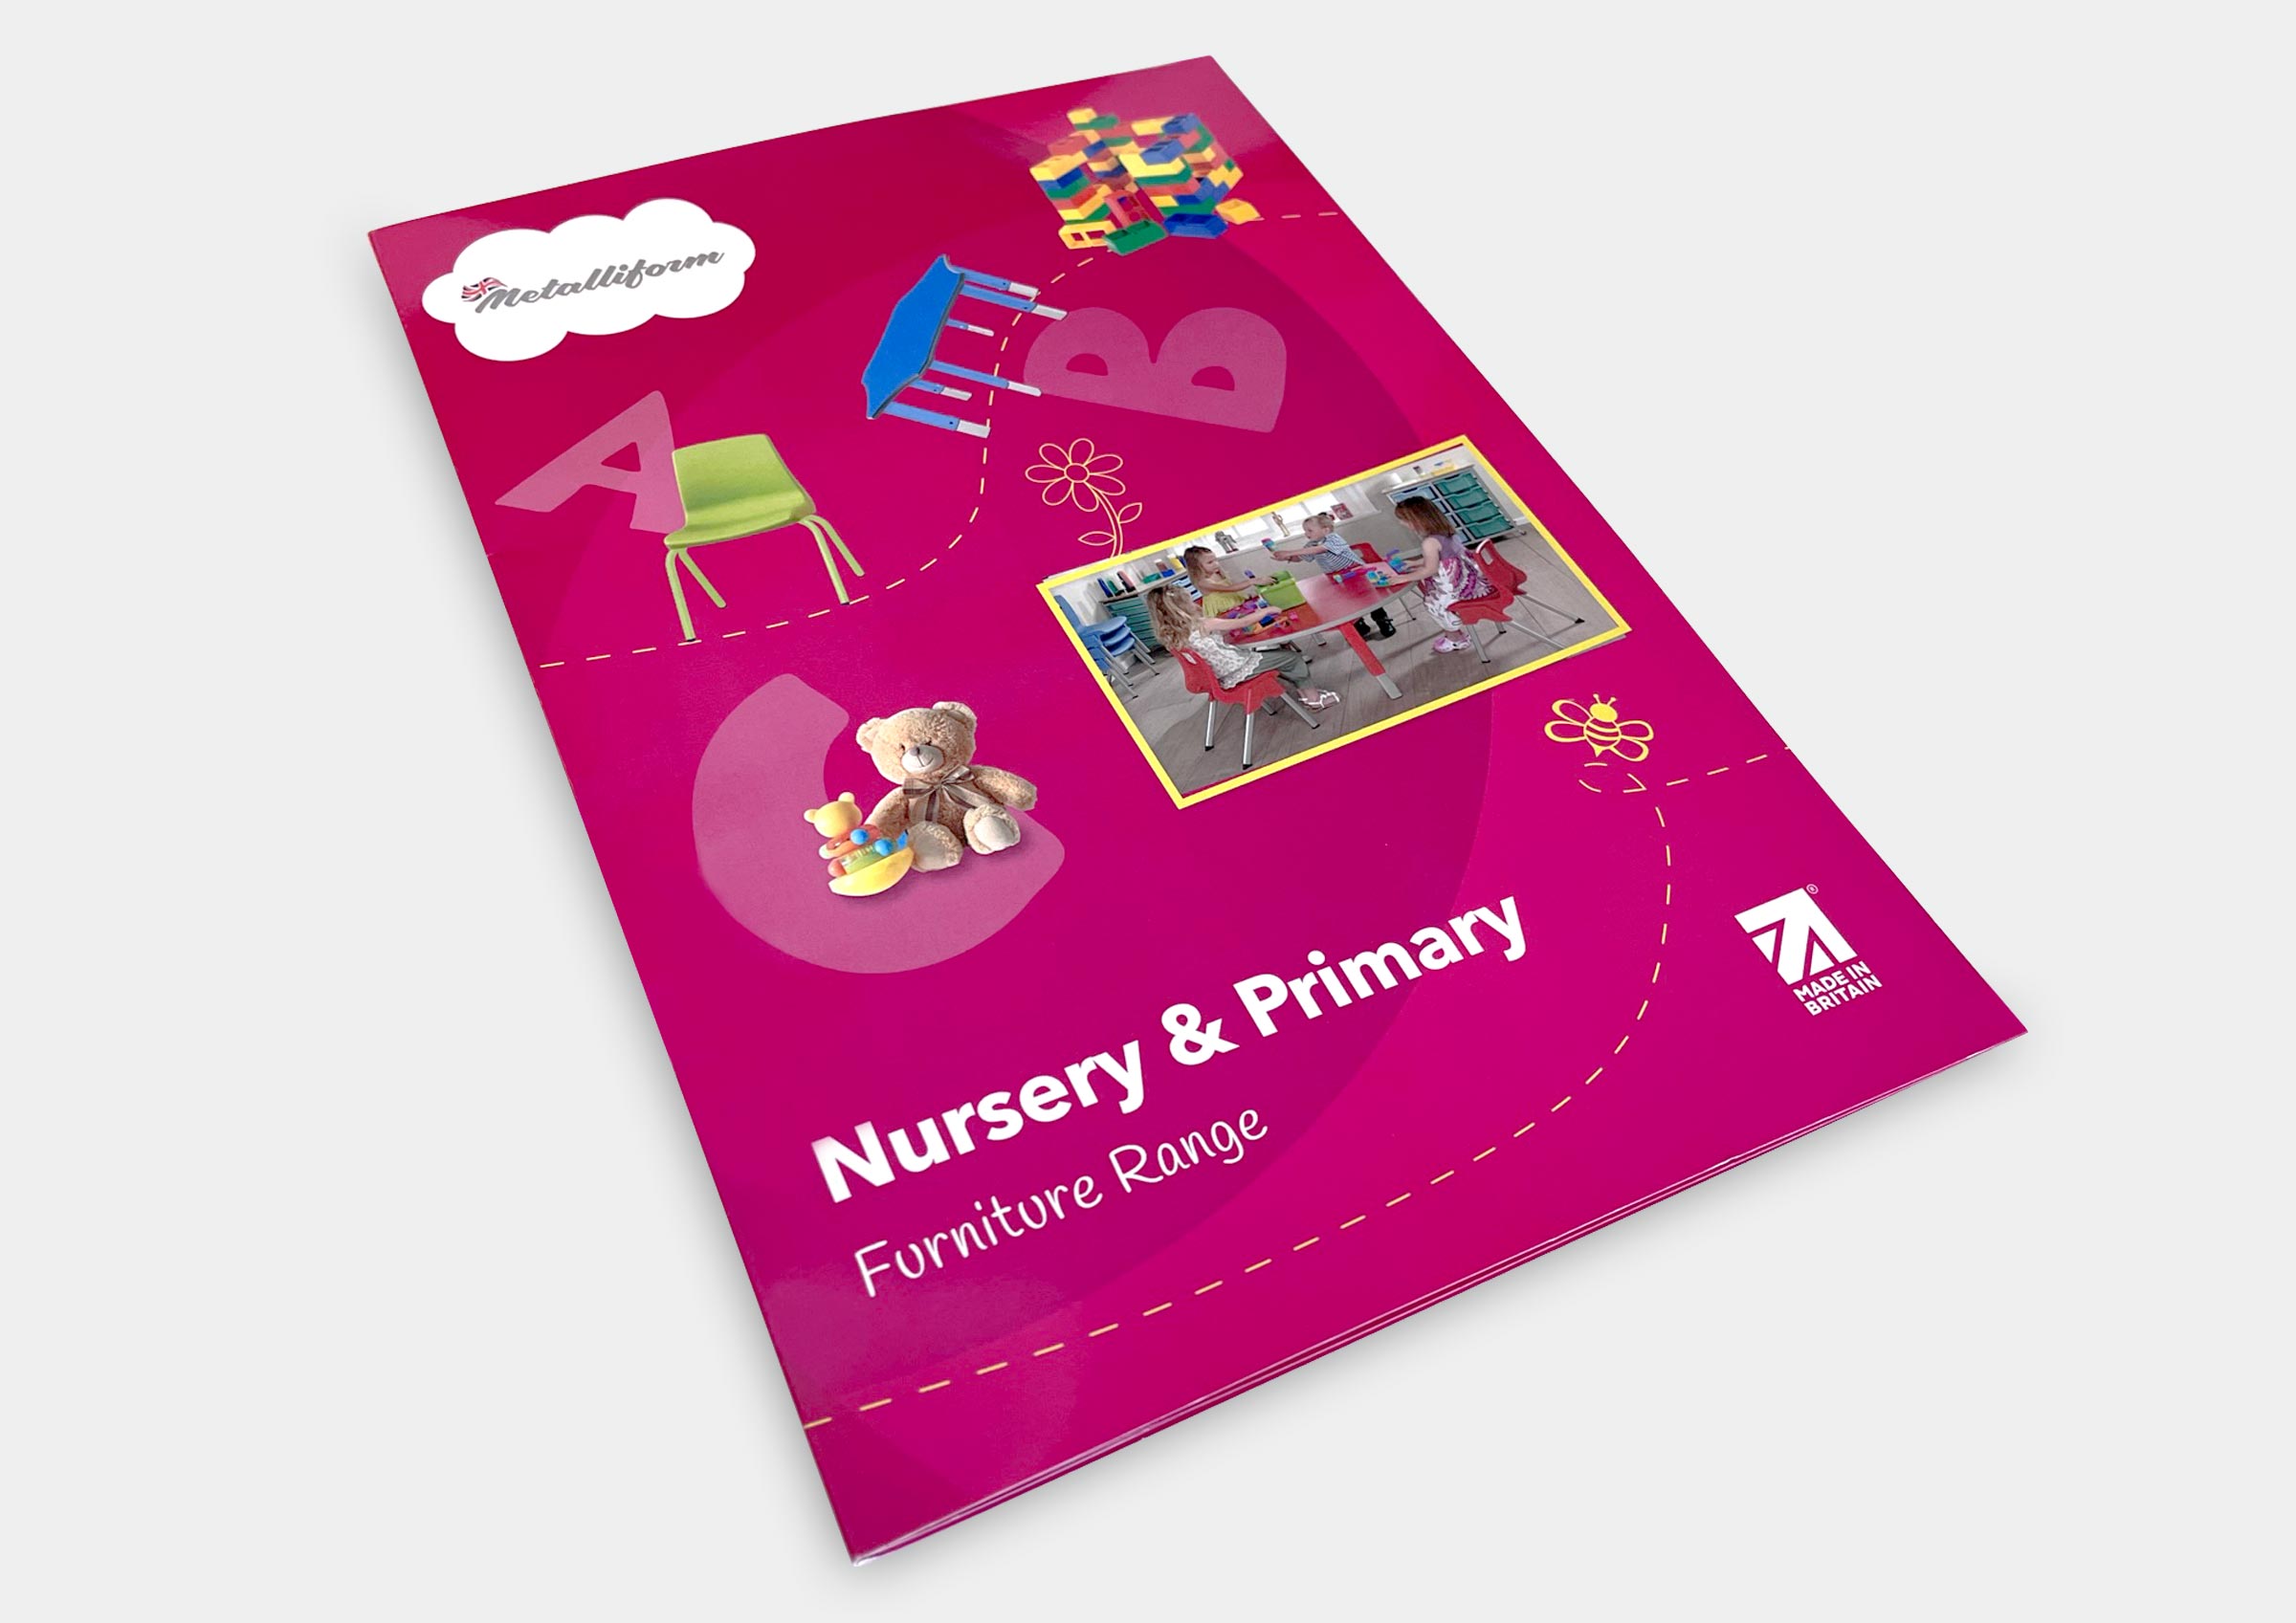 Nursery and primary furniture range brochure cover